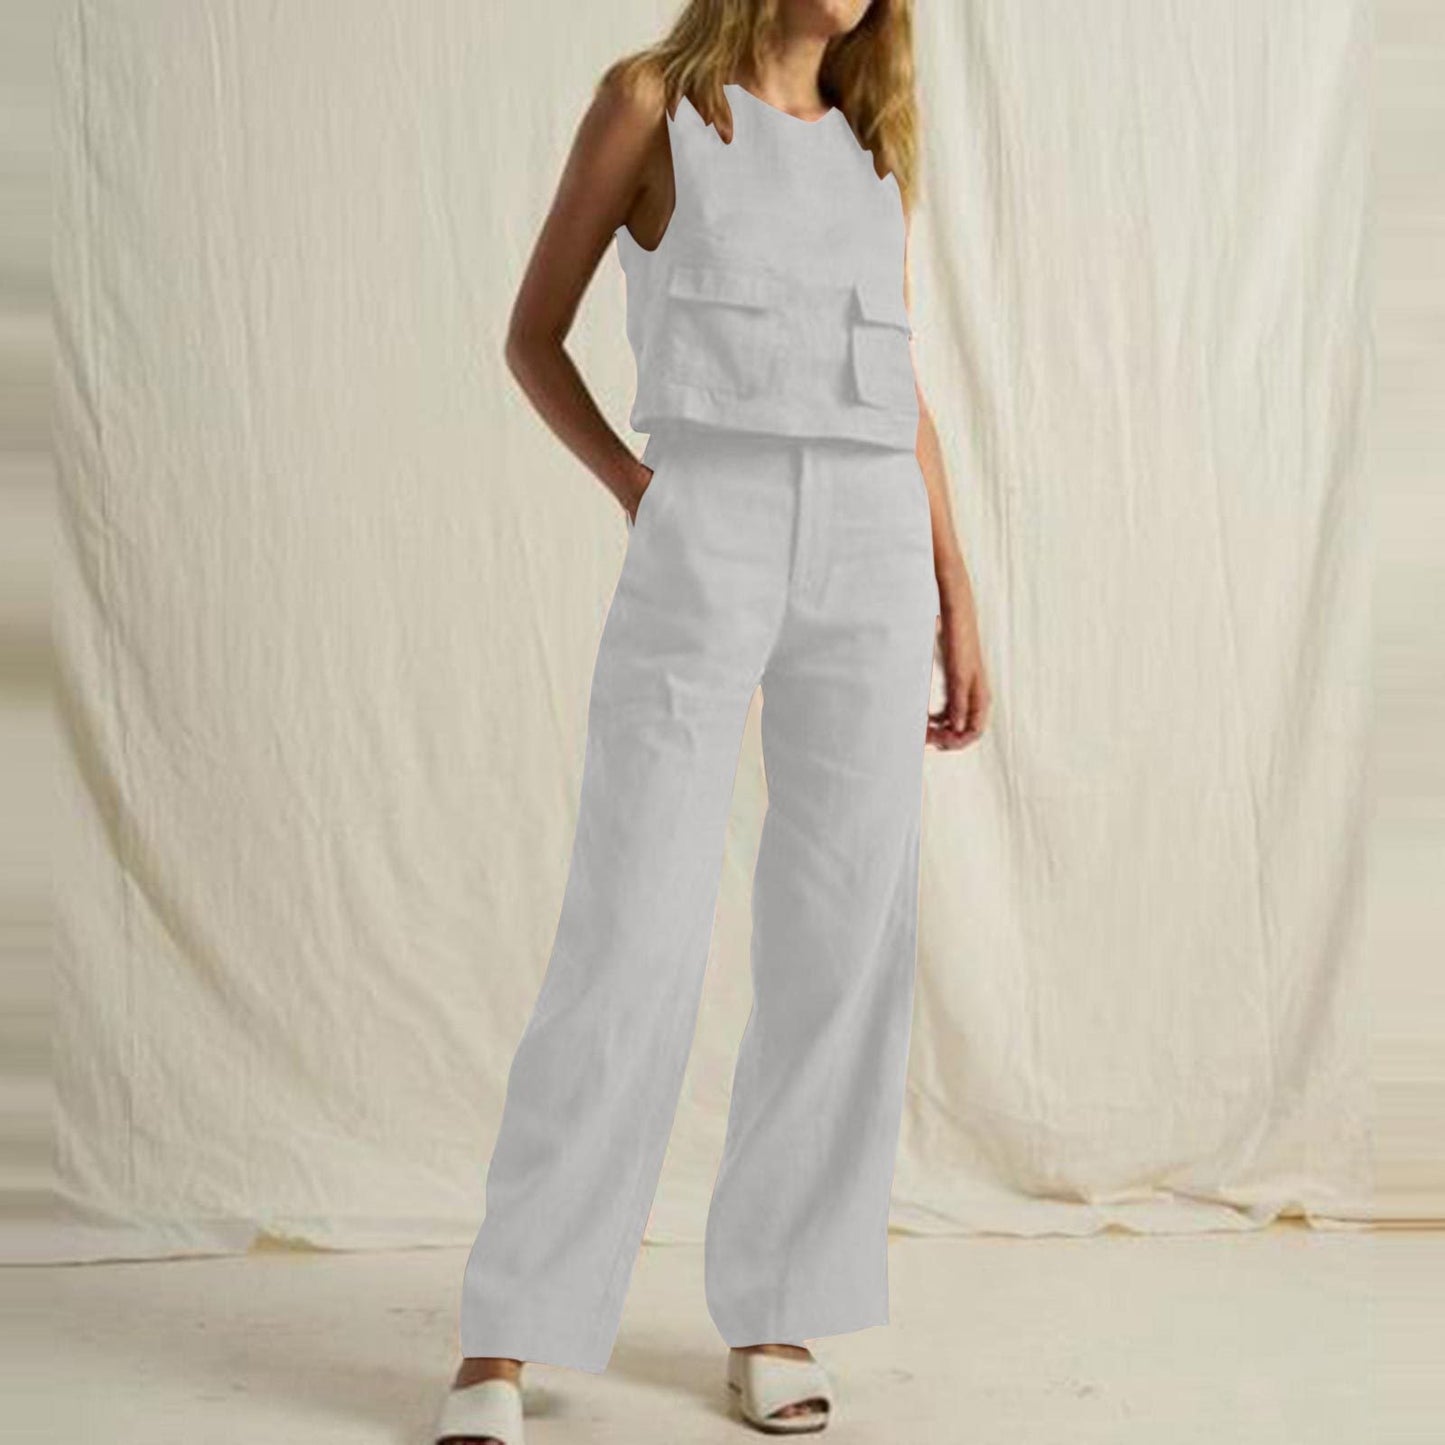 NTG Fad SUIT white / S Sleeveless pocket trousers casual suit